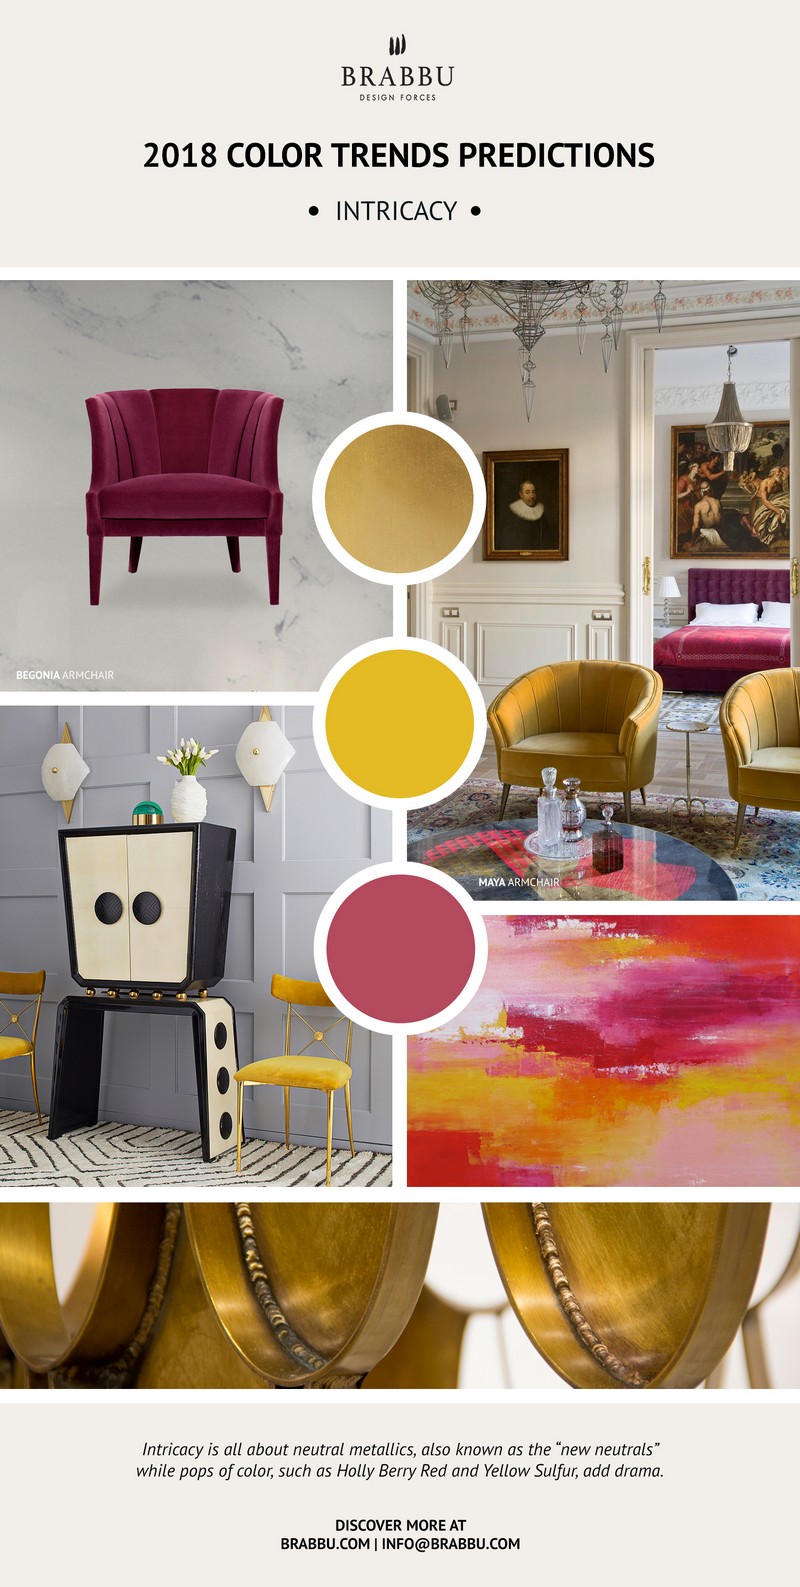 Interior Design Tips: The Pantone’s Color Predictions for 2018 > Best Design Guides > The Latest news on the design world > #pantonecolors #interiordesign #bestdesignguides